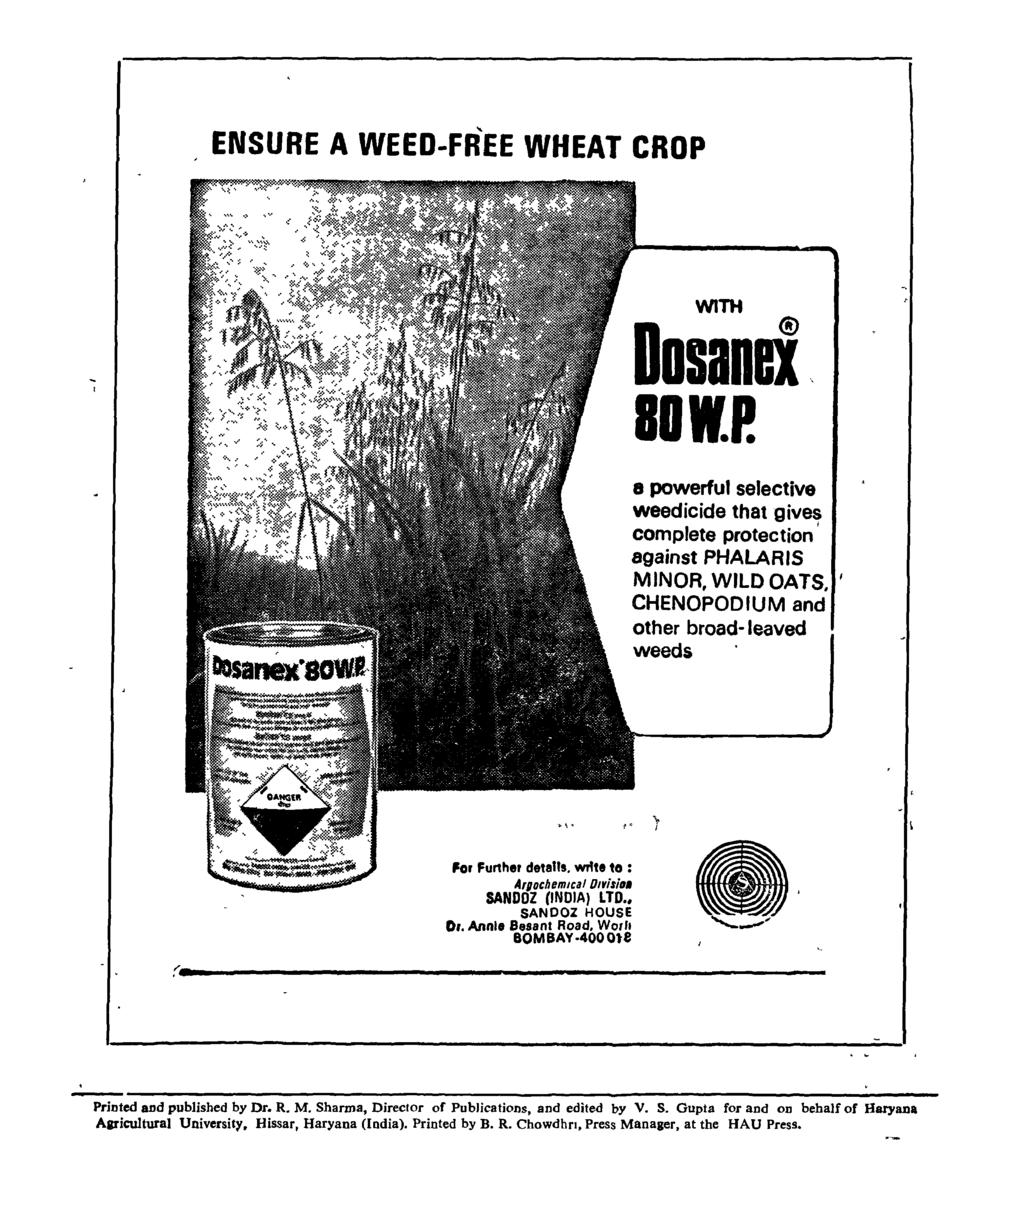 ENSURE A WEED-FREE WHEAT CROP WITH Dosand BOI.P. 8 powerful selective weedicide that gives I complete protection against PHALAAIS MINOA, WILD OATS. I CHENOPOD IUM and other broad-leaved weeds I " (.